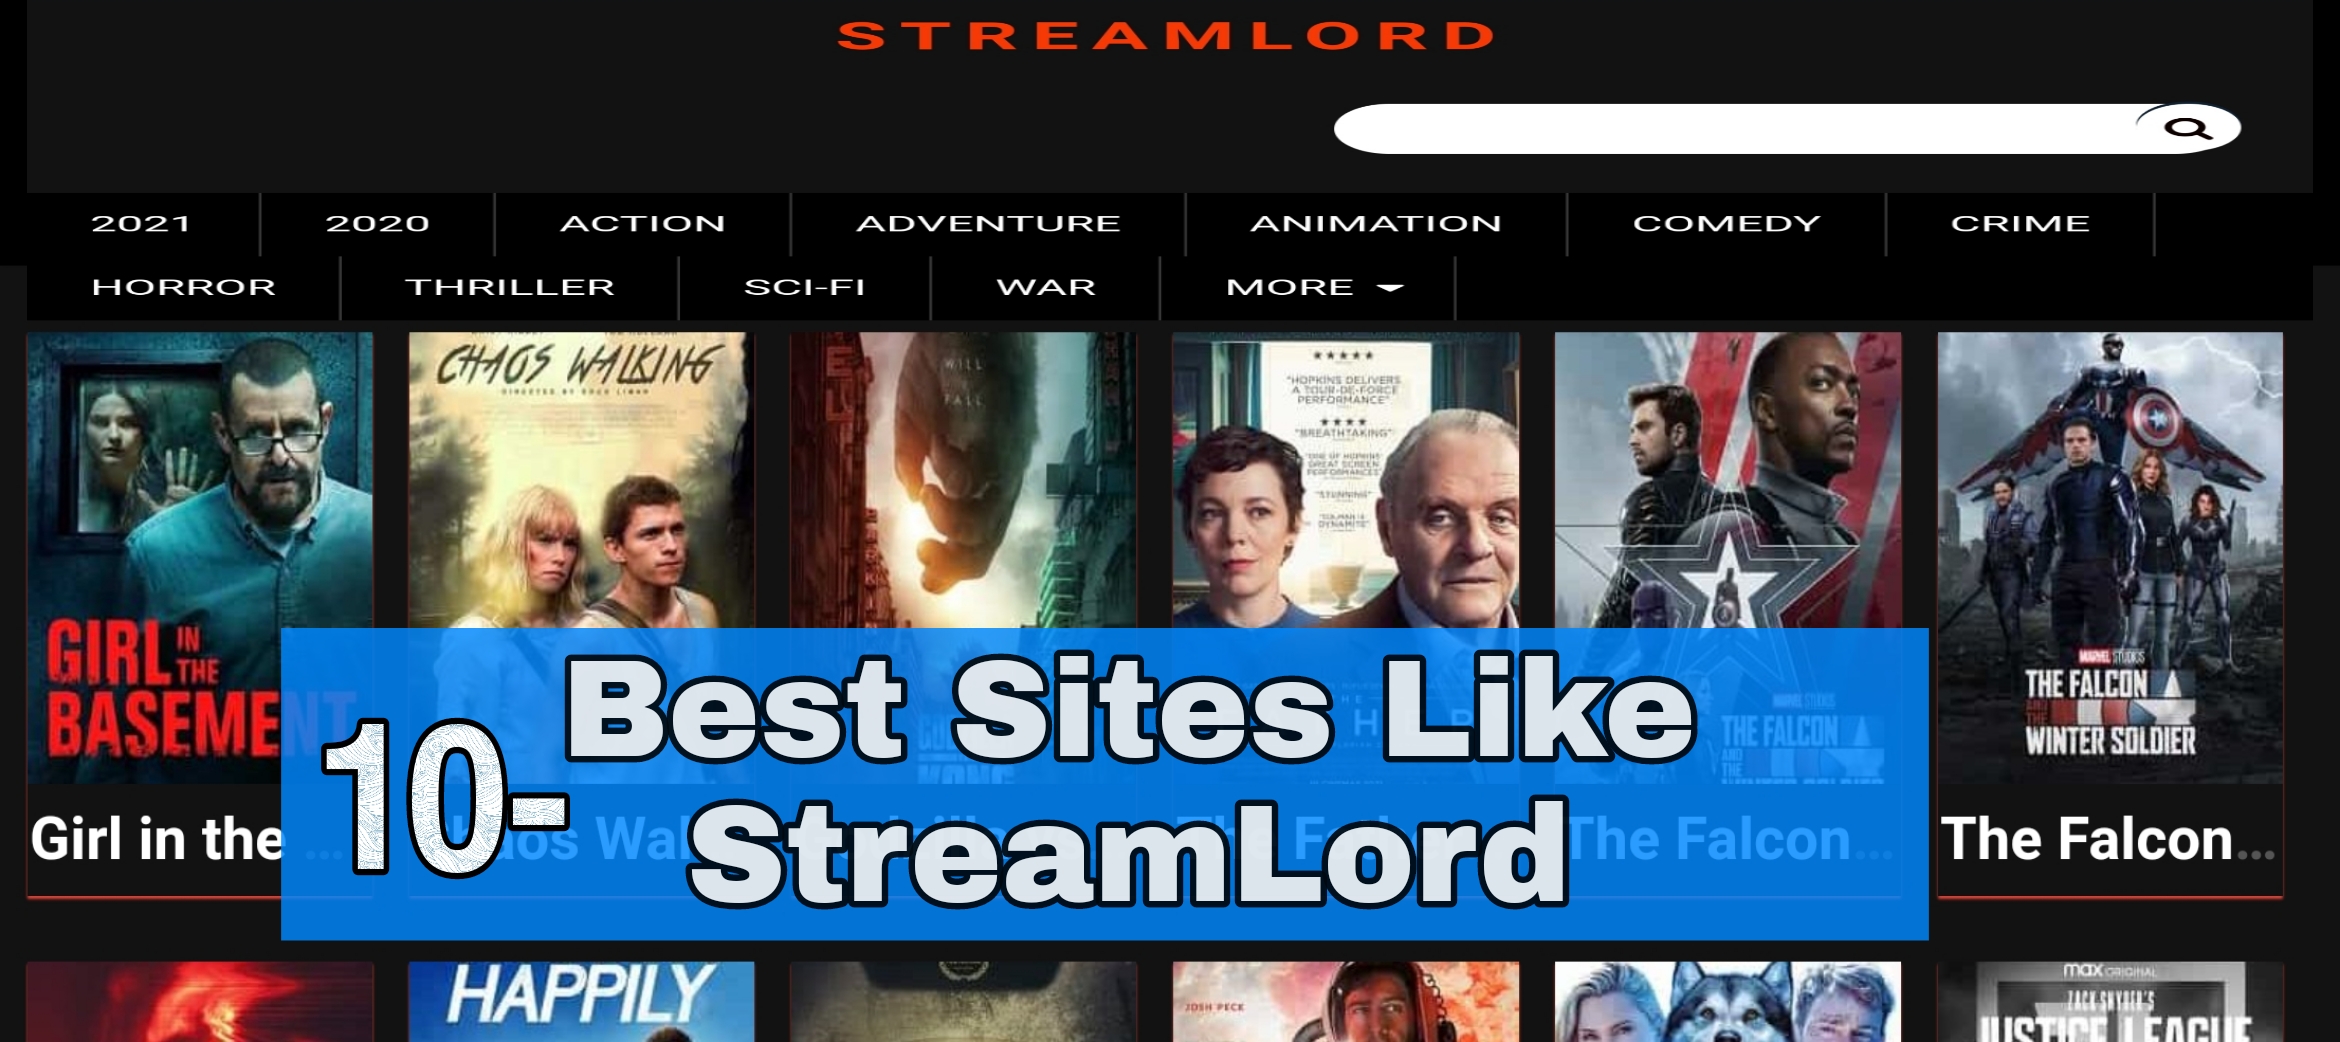 Best Sites Like Streamlord